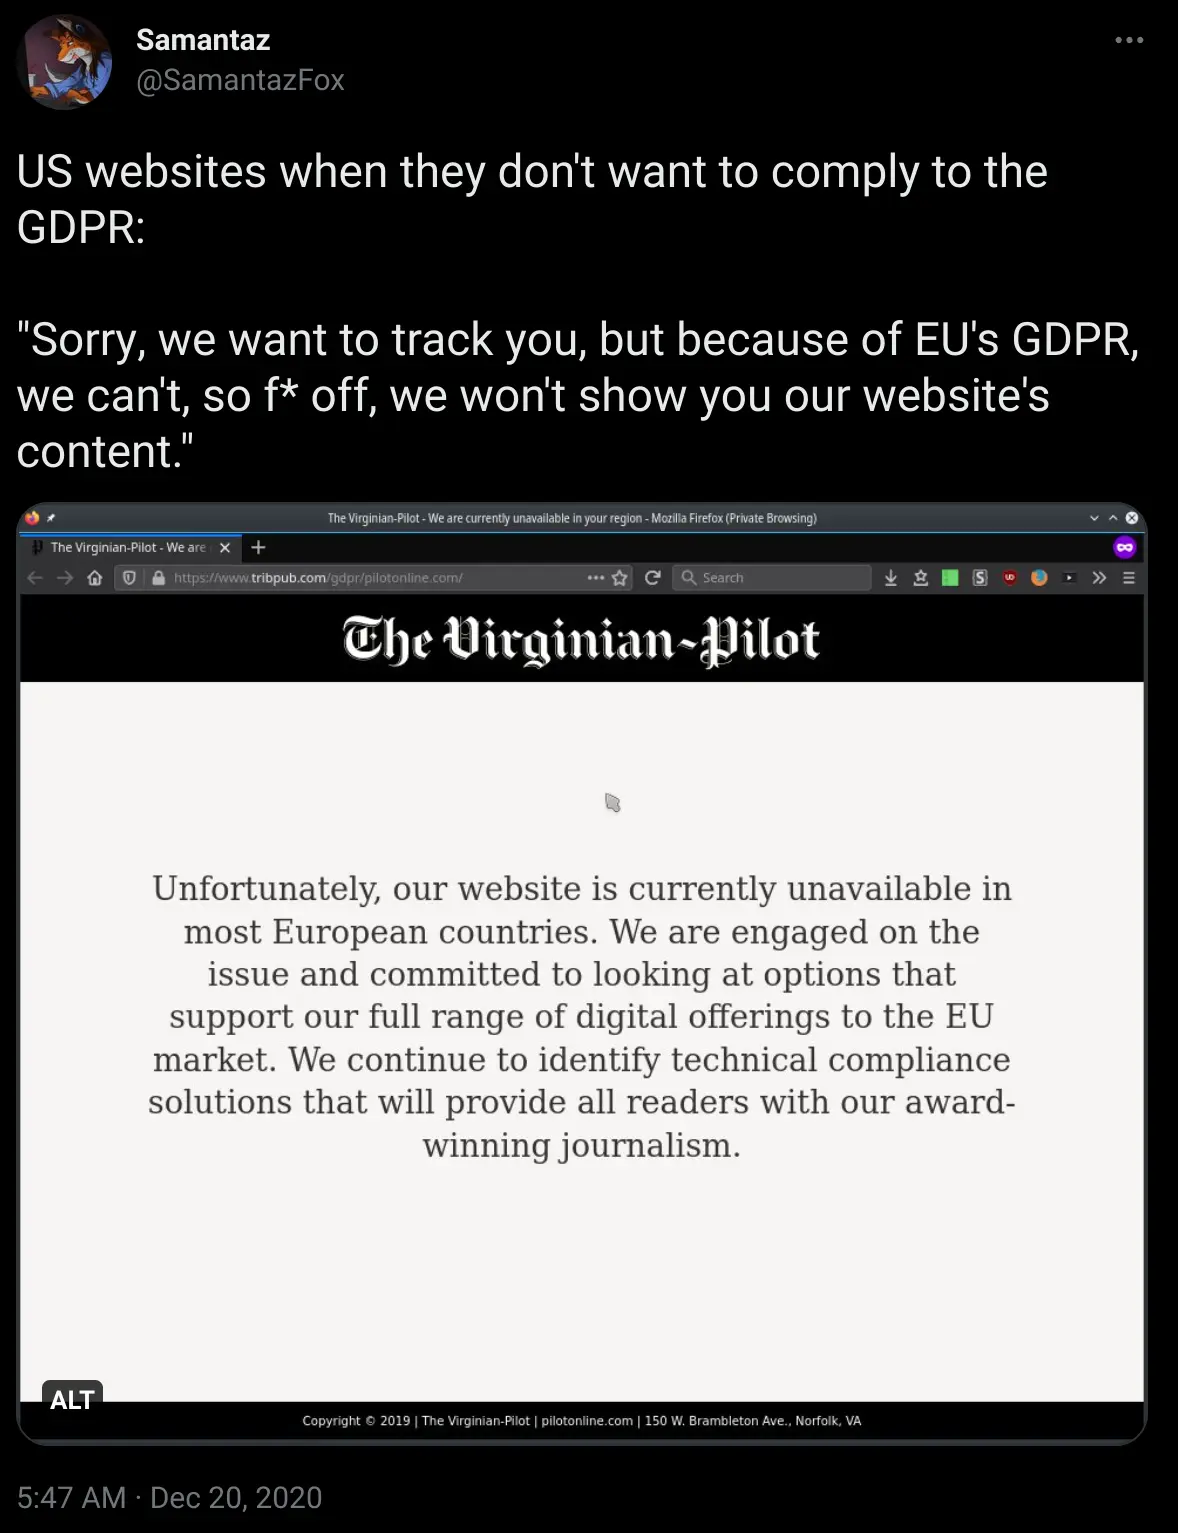 The Virginian-Pilot website: Unfortunately, our website is currently unavailable in most European countries. We are engaged on the issue and committed to looking at options that support our full range of digital offerings to the EU market. We continue to identify technical compliance solutions that will provide all readers with our award-winning journalism.